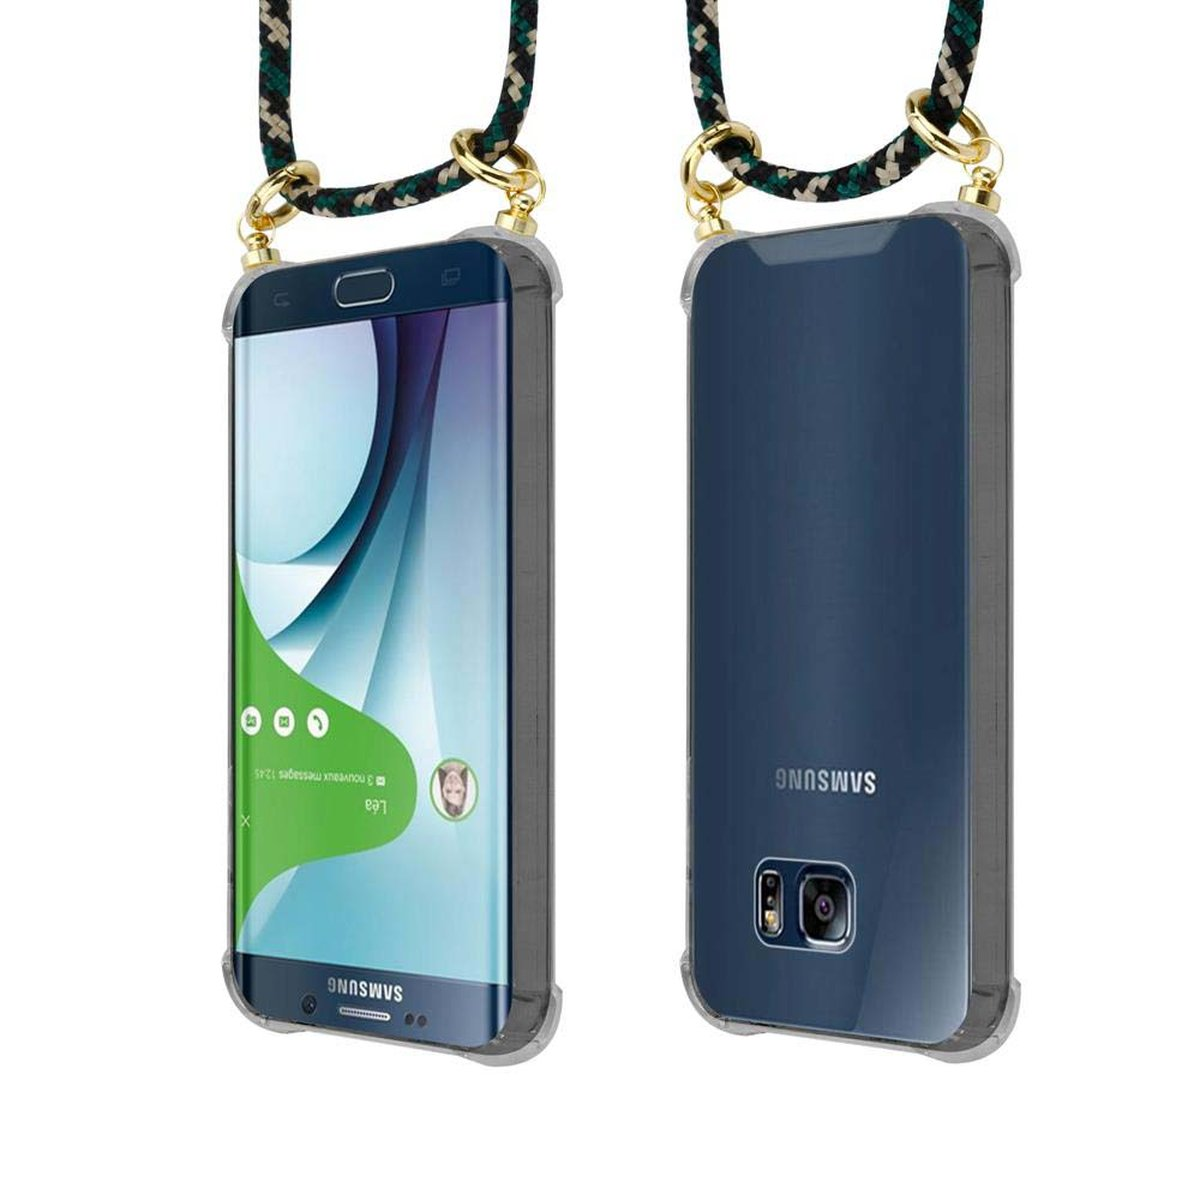 Gold Kette Ringen, CAMOUFLAGE Backcover, Handy Kordel Samsung, mit abnehmbarer CADORABO und Band Hülle, EDGE, S6 Galaxy